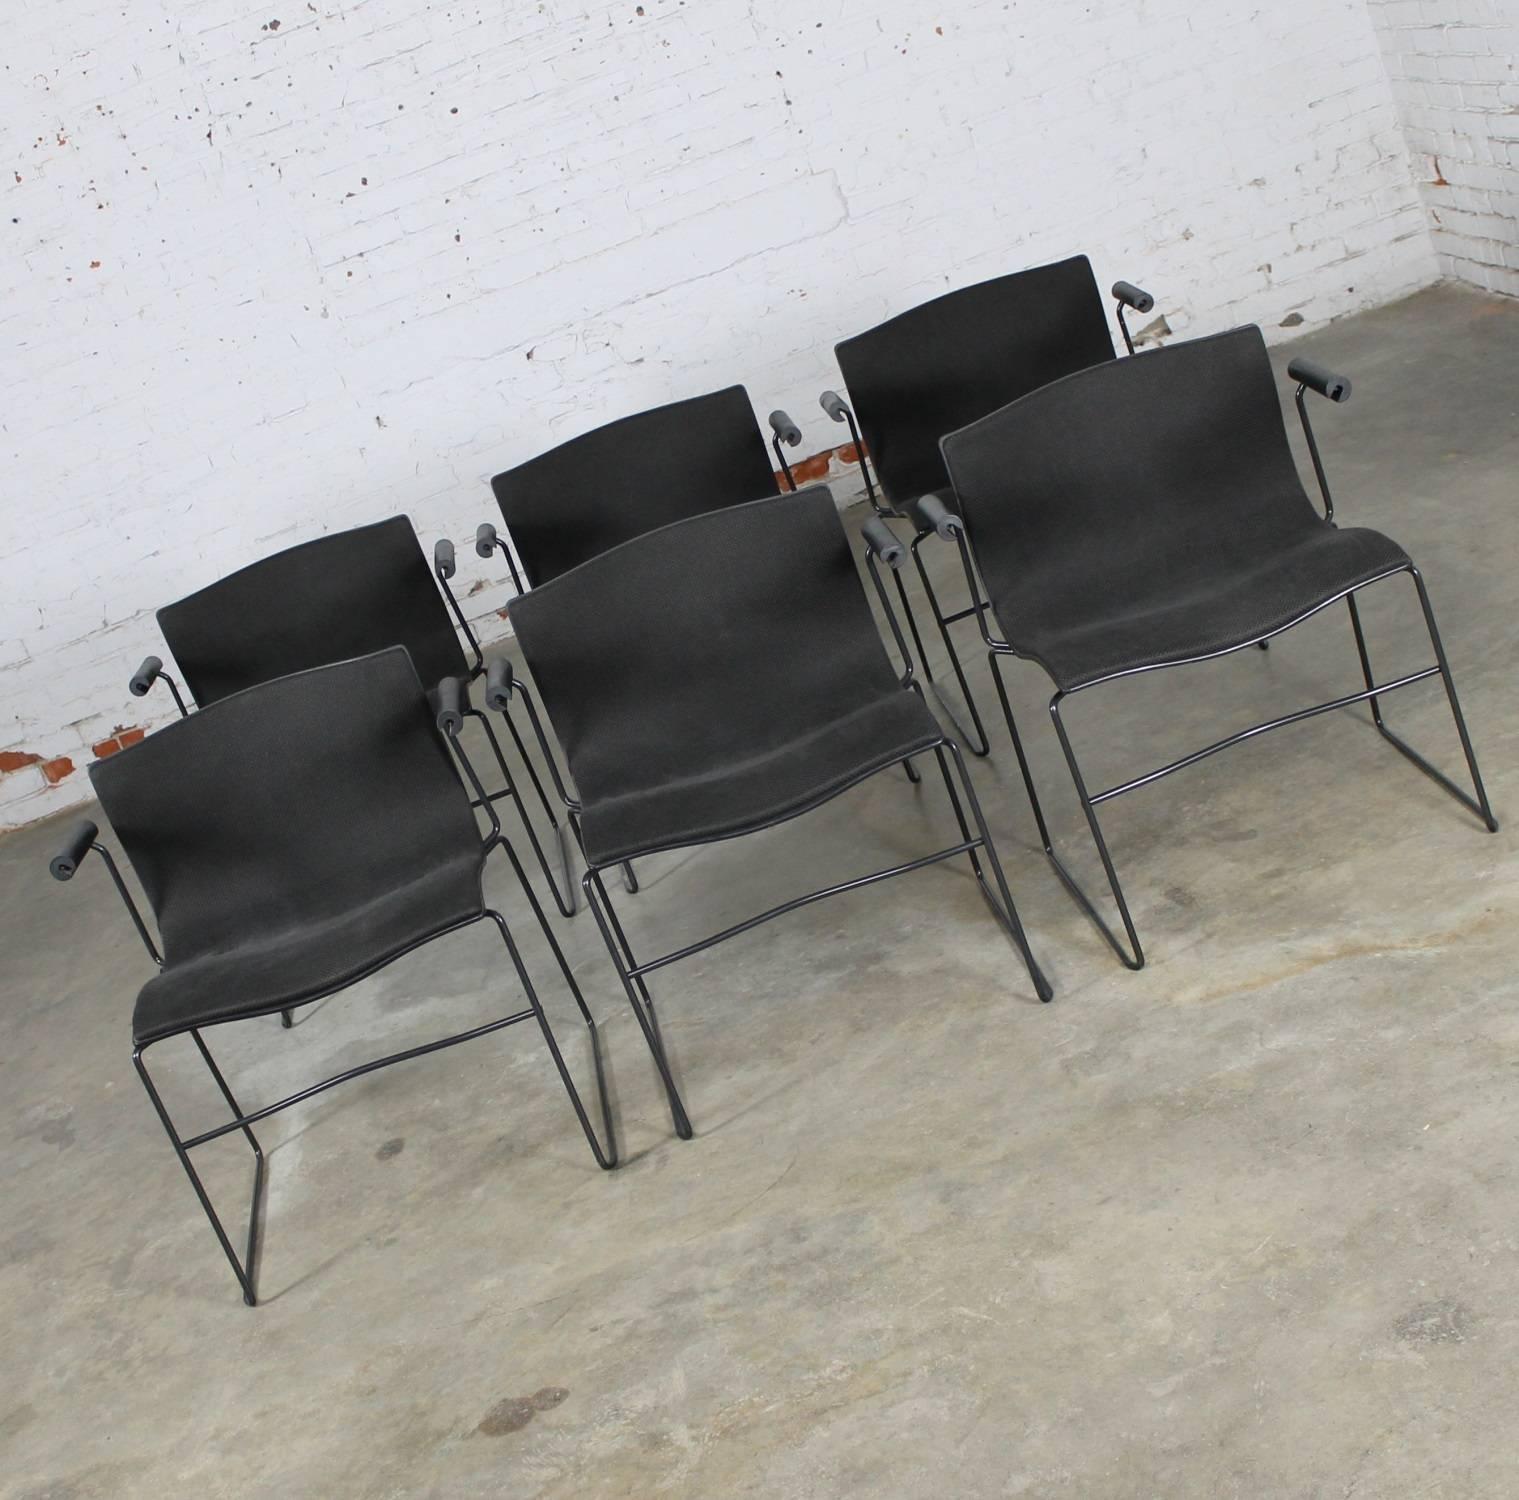 Handsome set of six Knoll handkerchief armchairs in black upholstery. This chair was designed by the husband and wife team of Massimo and Lella Vignelli for Knoll, circa 1983. This particular set of six are in wonderful vintage condition, circa